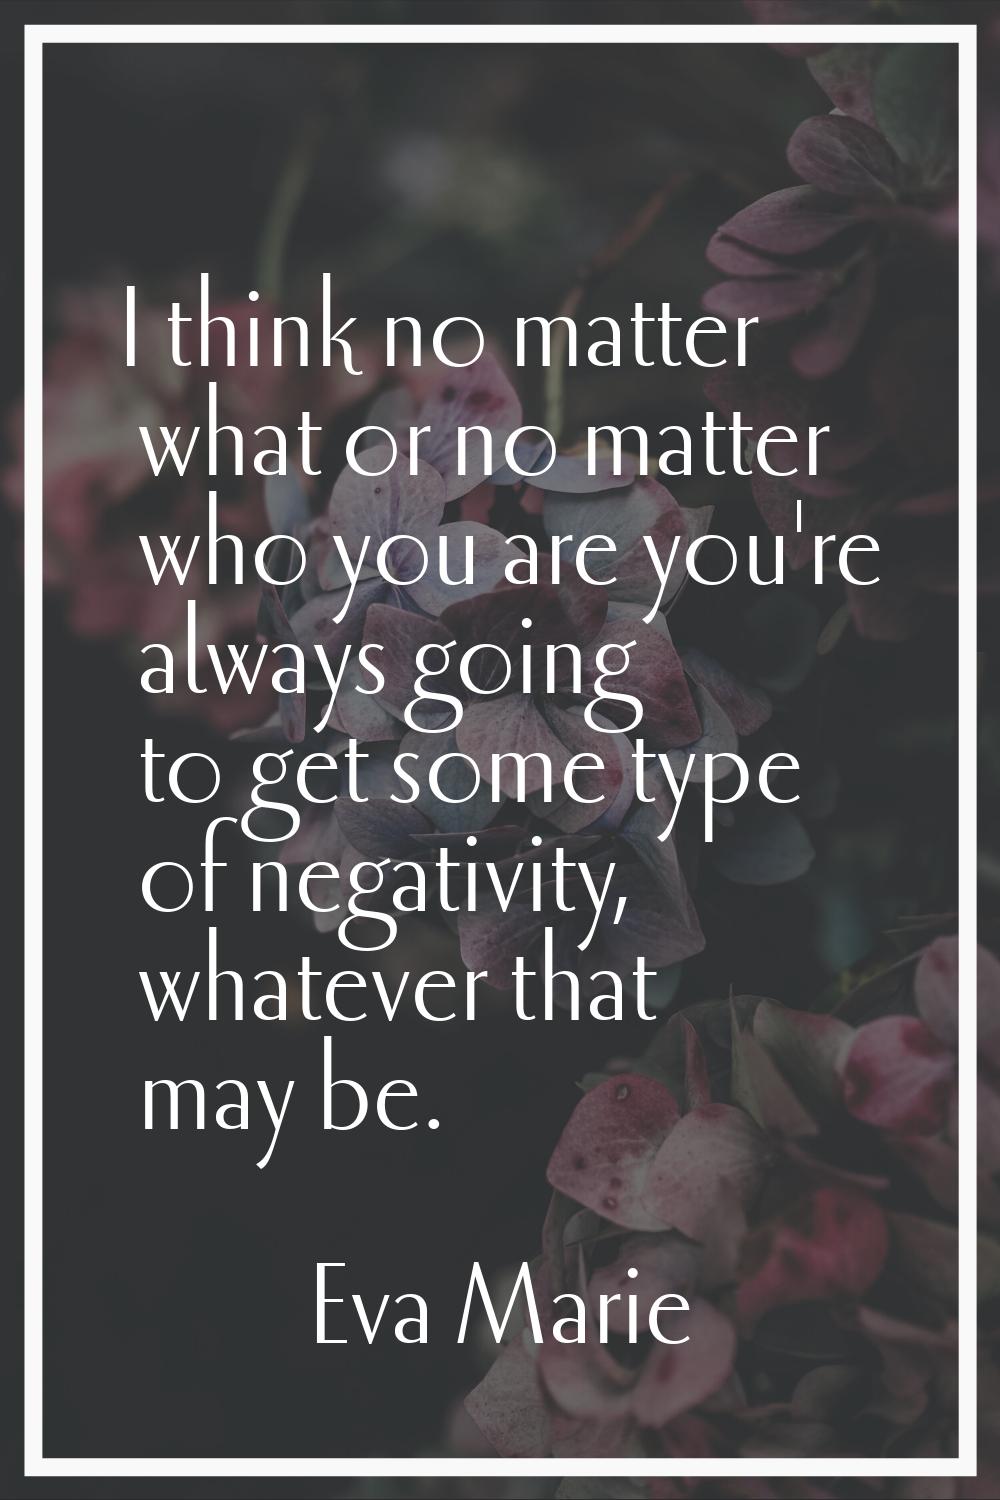 I think no matter what or no matter who you are you're always going to get some type of negativity,